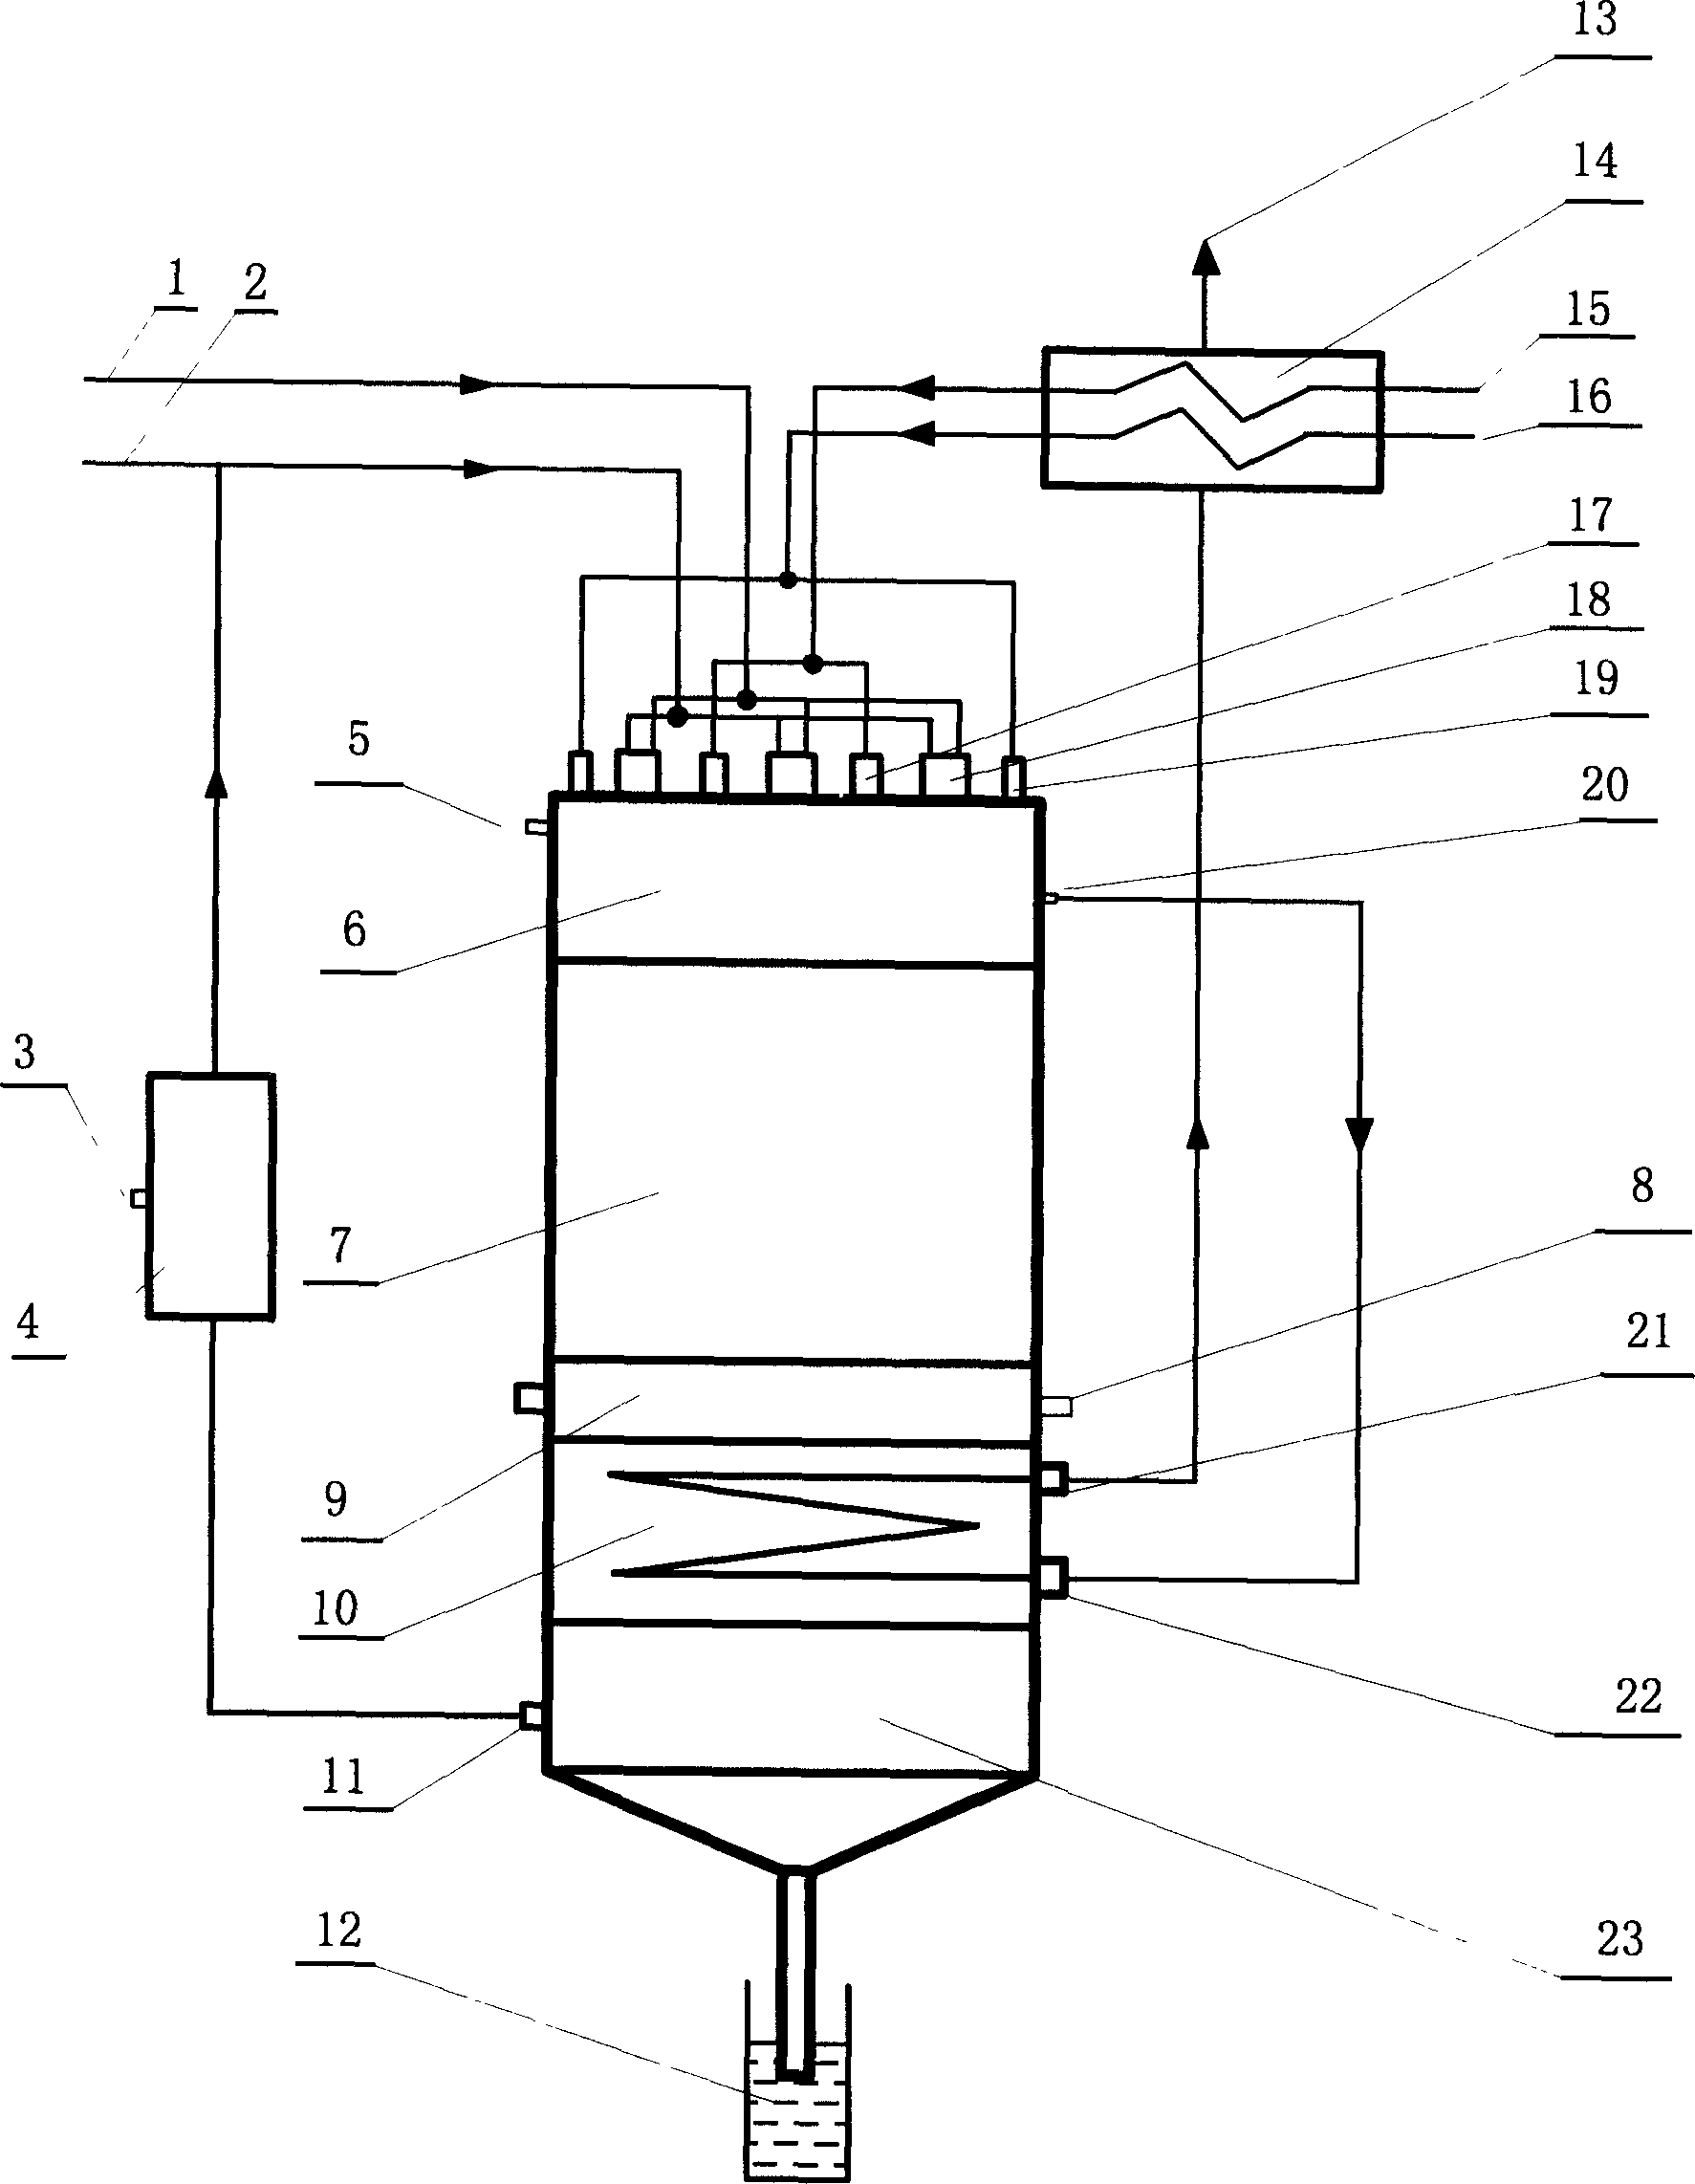 Apparatus and process for producing acetylene by plasma pyrolysis of coal and natural gas